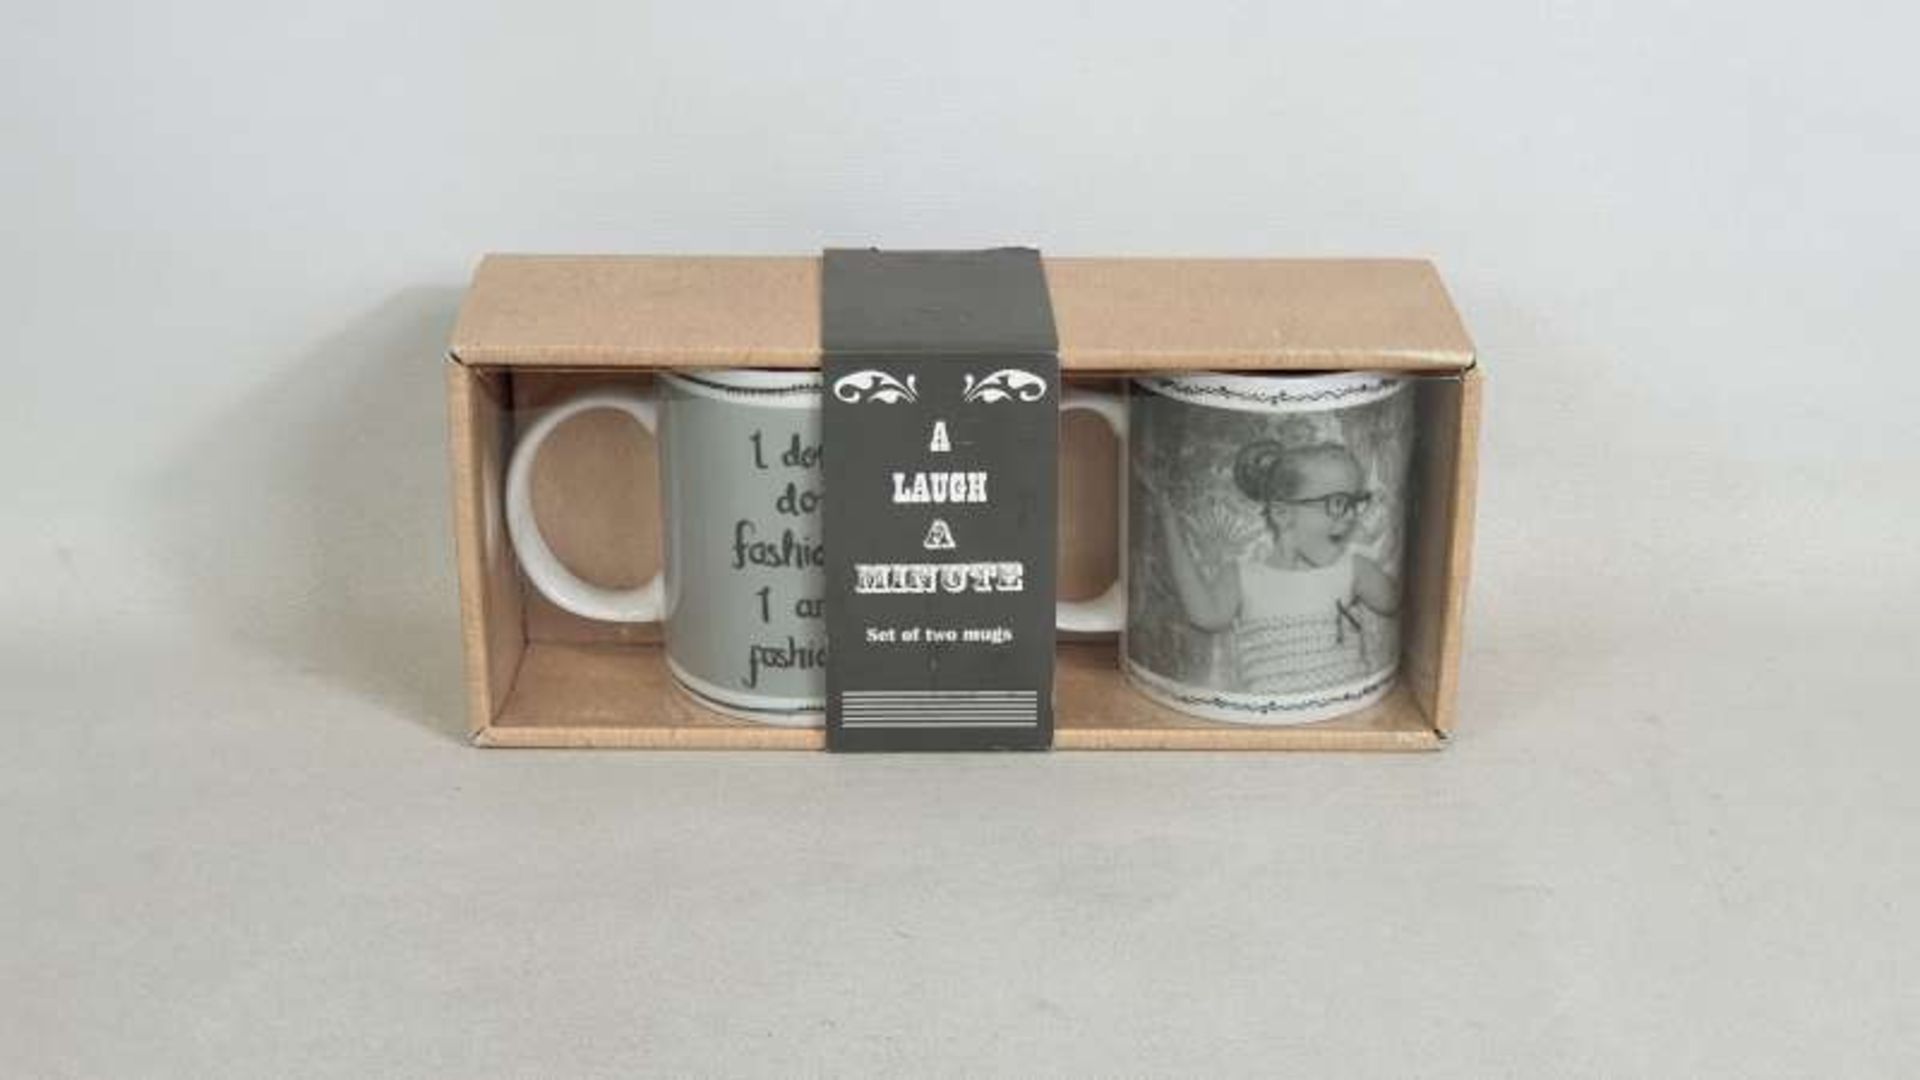 60 X SETS OF 2 MUGS IN 4 BOXES